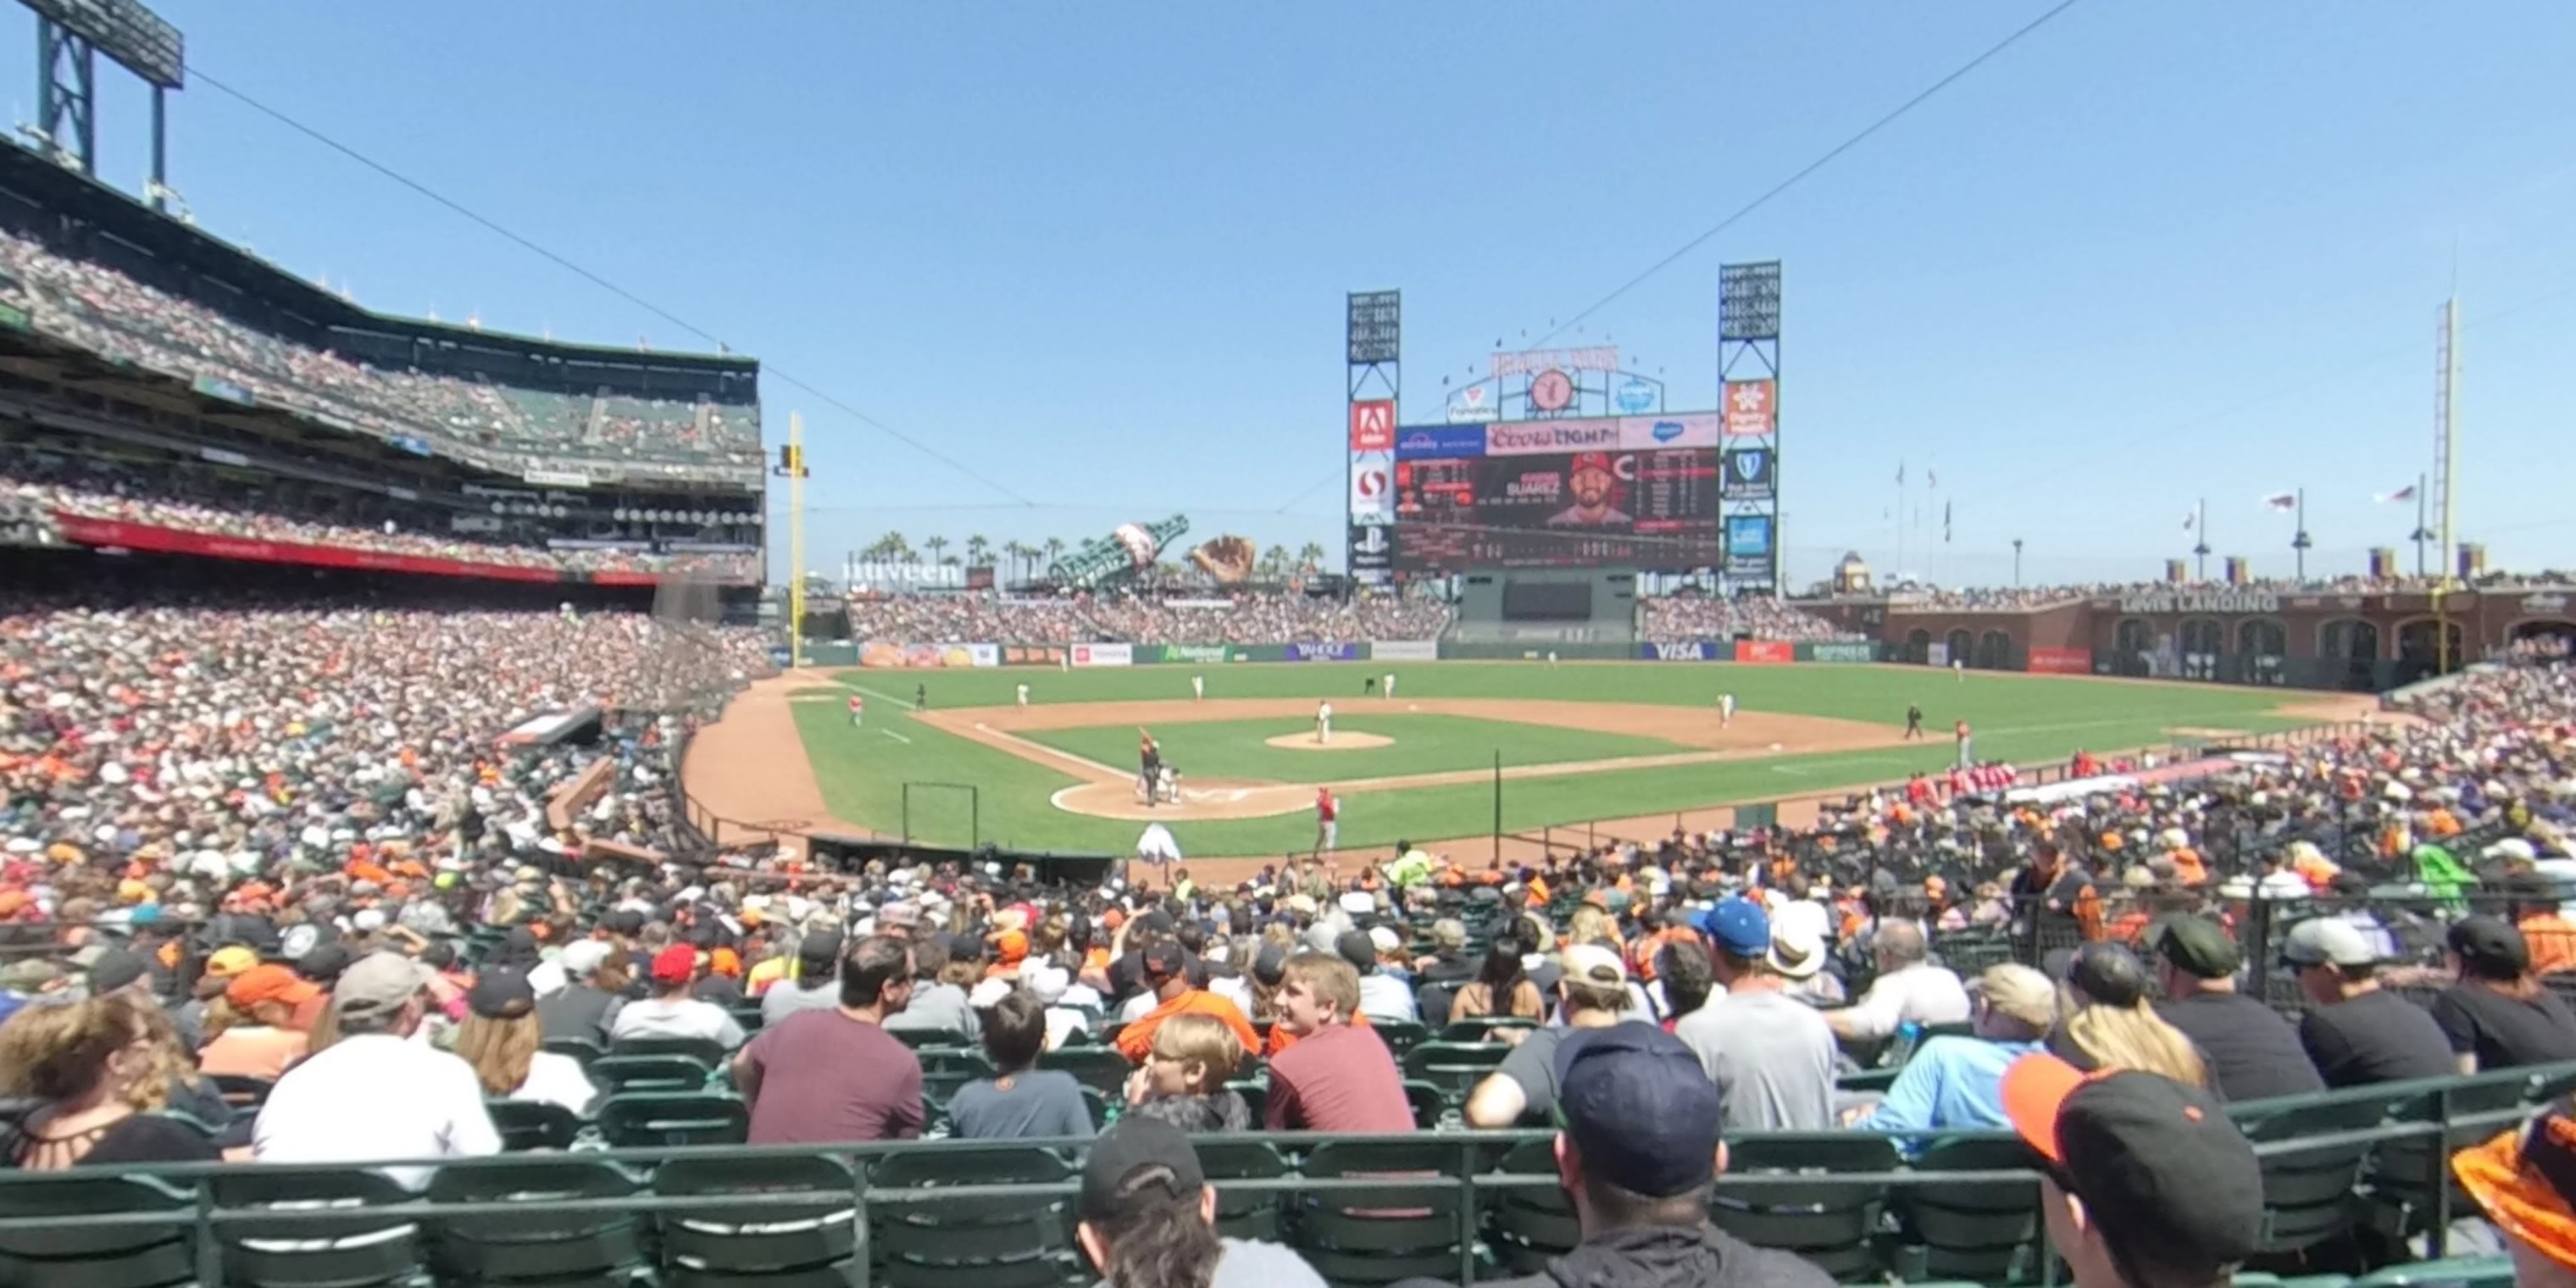 section 113 panoramic seat view  for baseball - oracle park